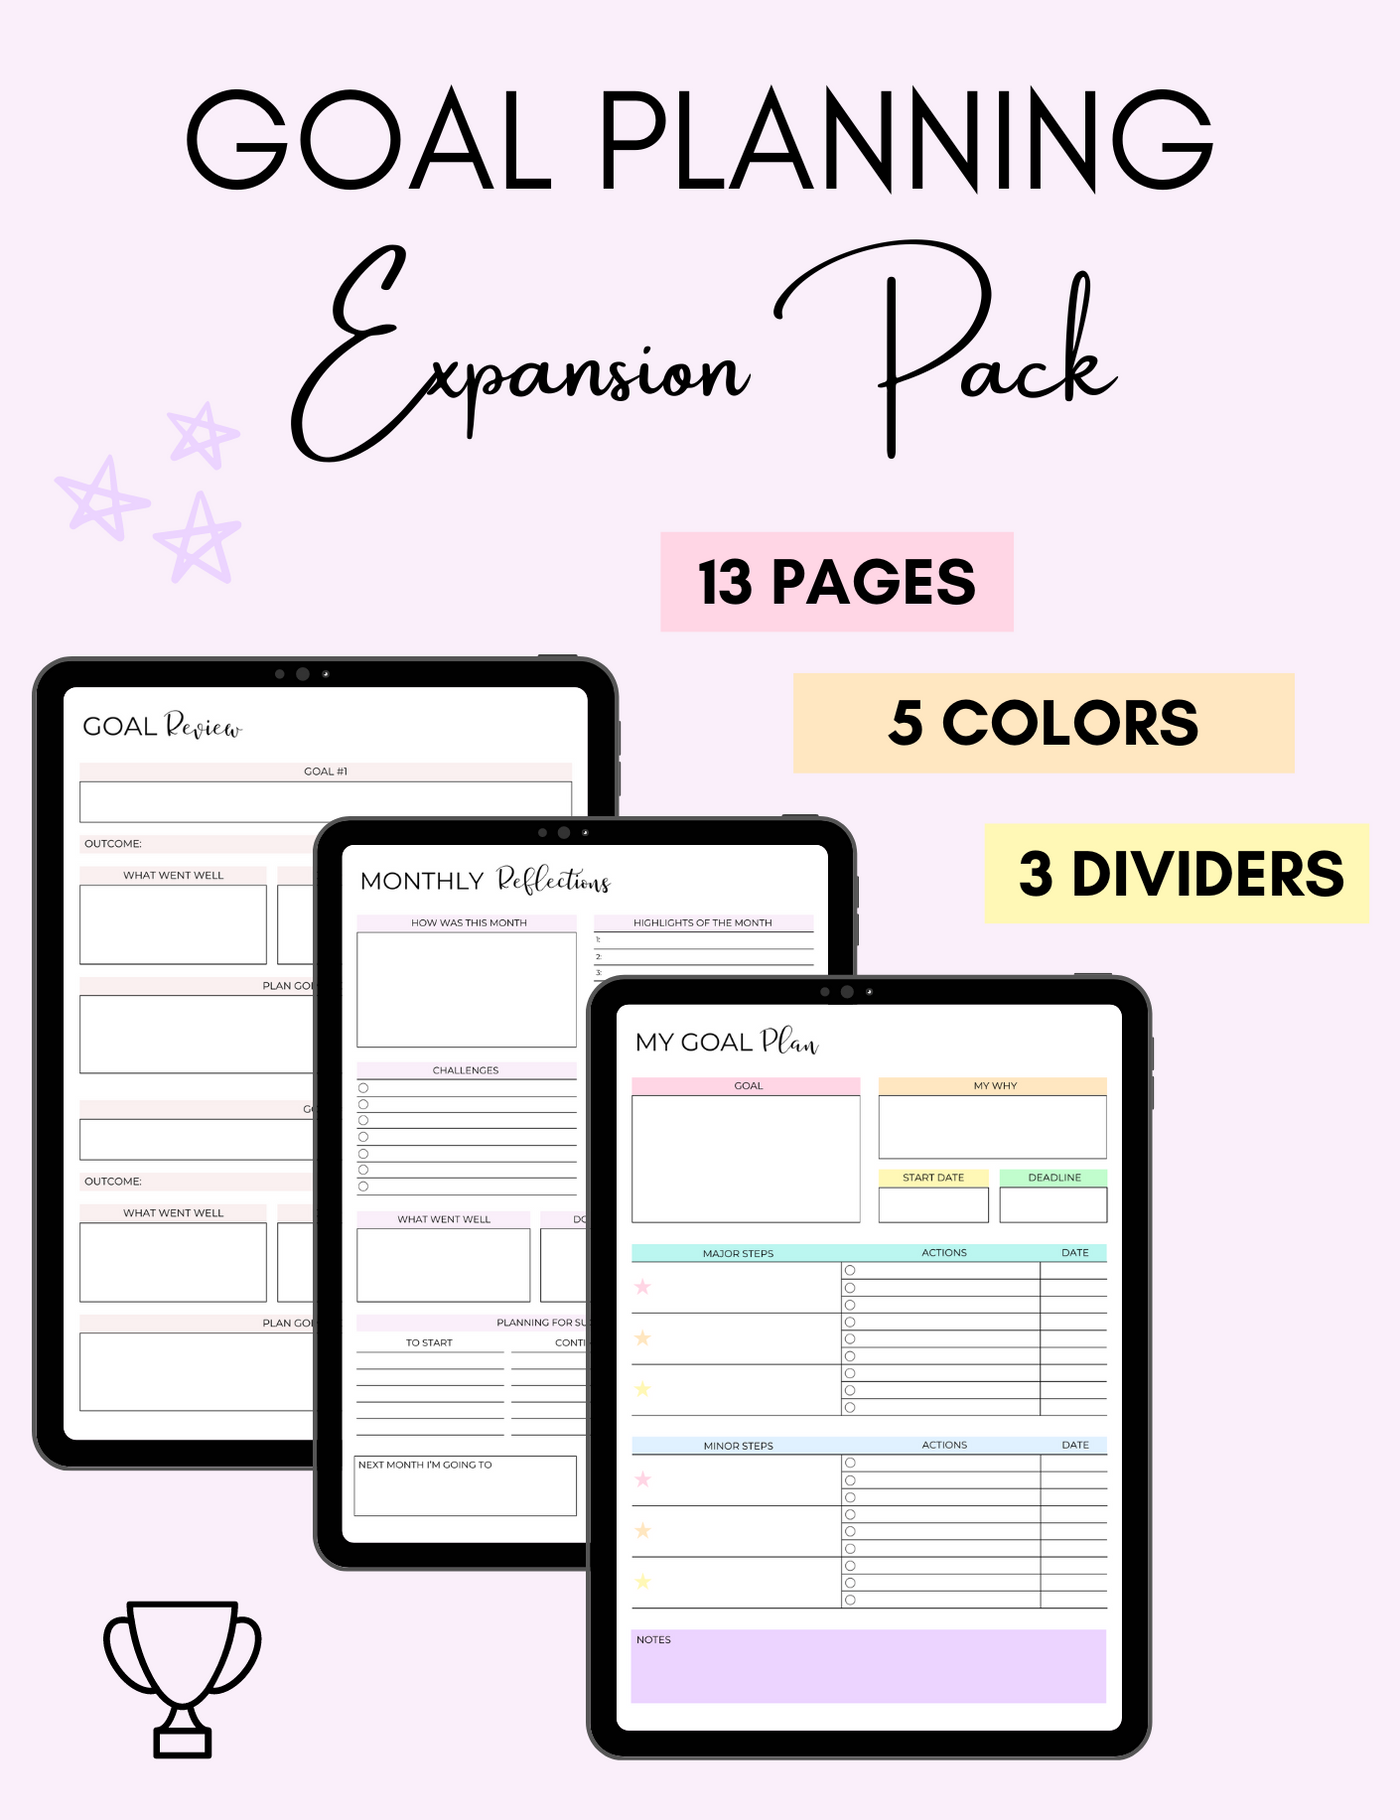 Goal Planning Expansion Pack